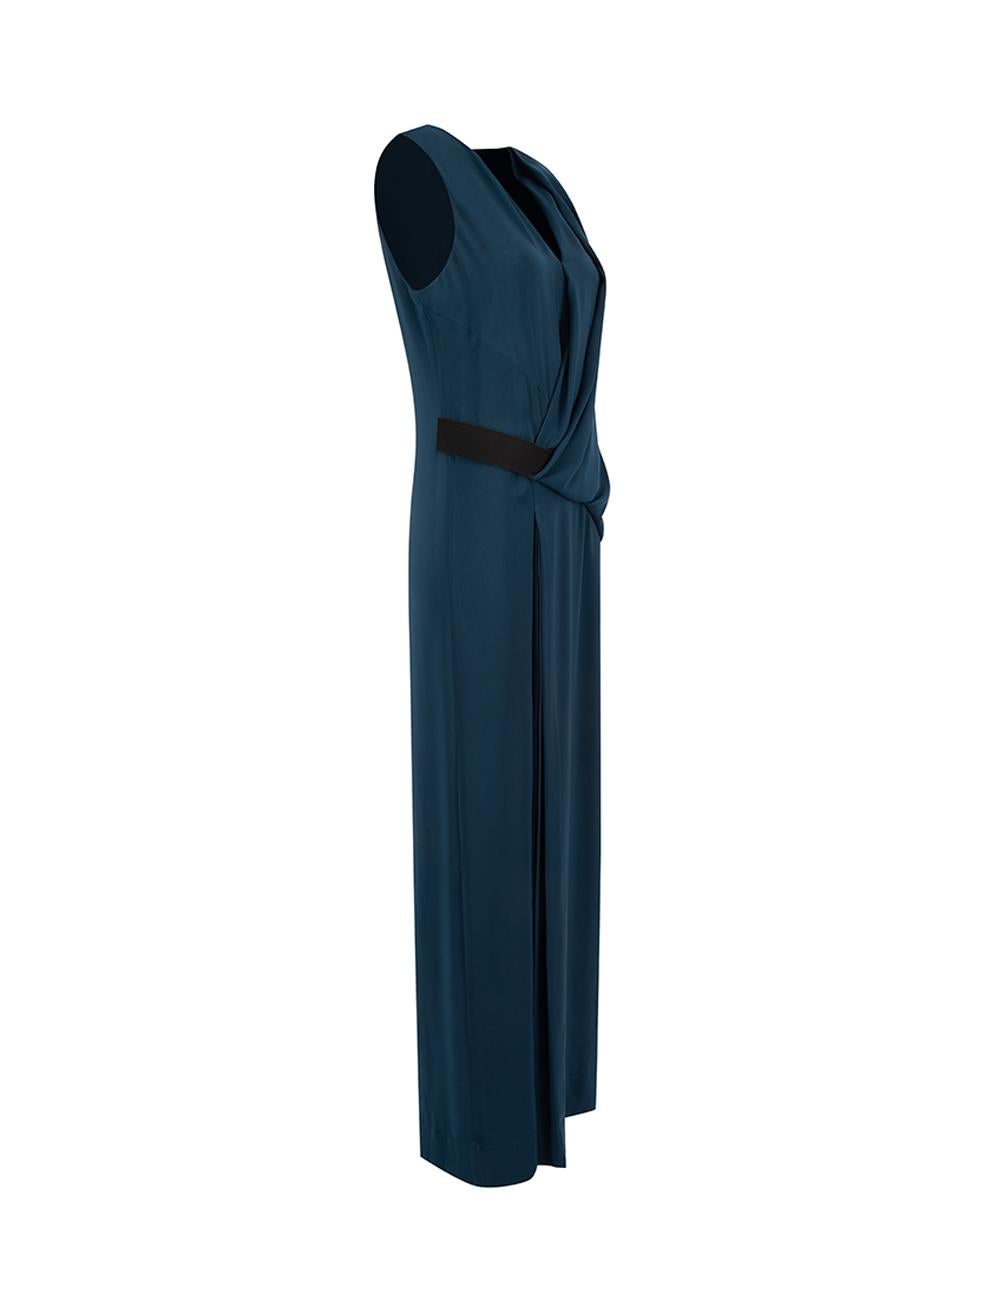 CONDITION is Very good. Minimal wear to dress is evident. Minimal wear to the hemline where stains can be seen on this used Cedric Charlier designer resale item.   Details  Navy Polyester Maxi dress Asymmetric and partially pleated design V neckline